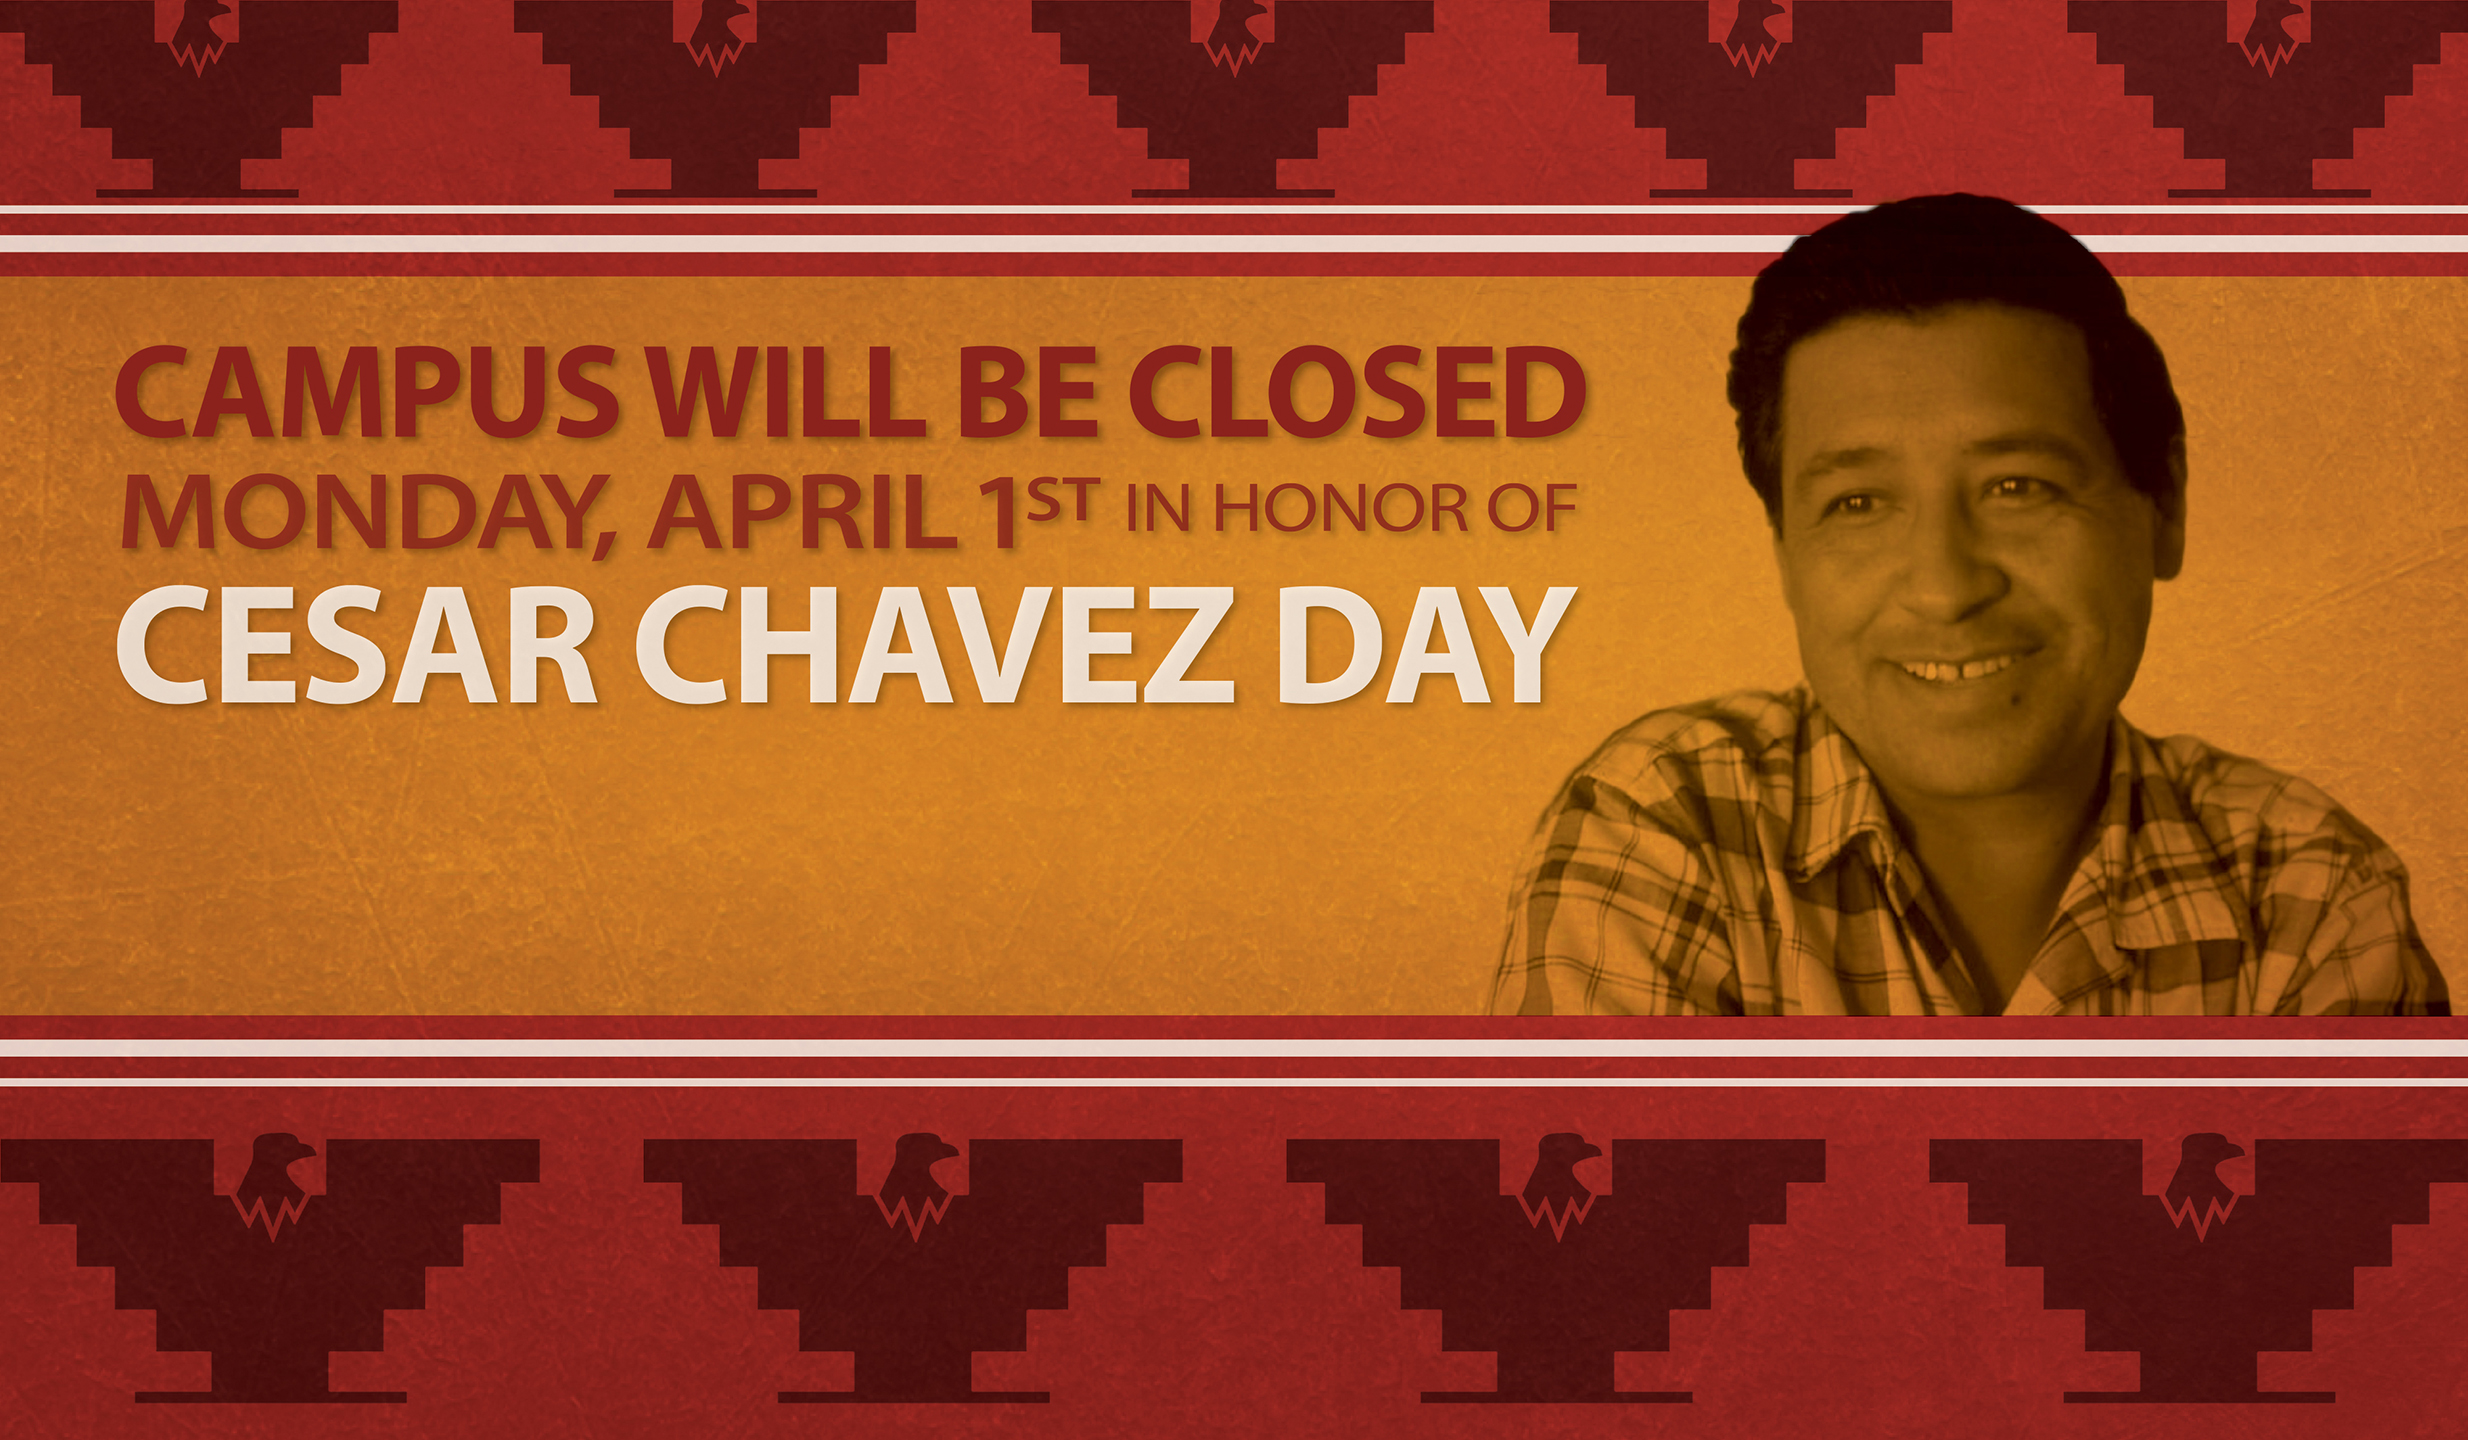 Campus will be closed Monday, April 1st in honor of Cesar Chavez Day.